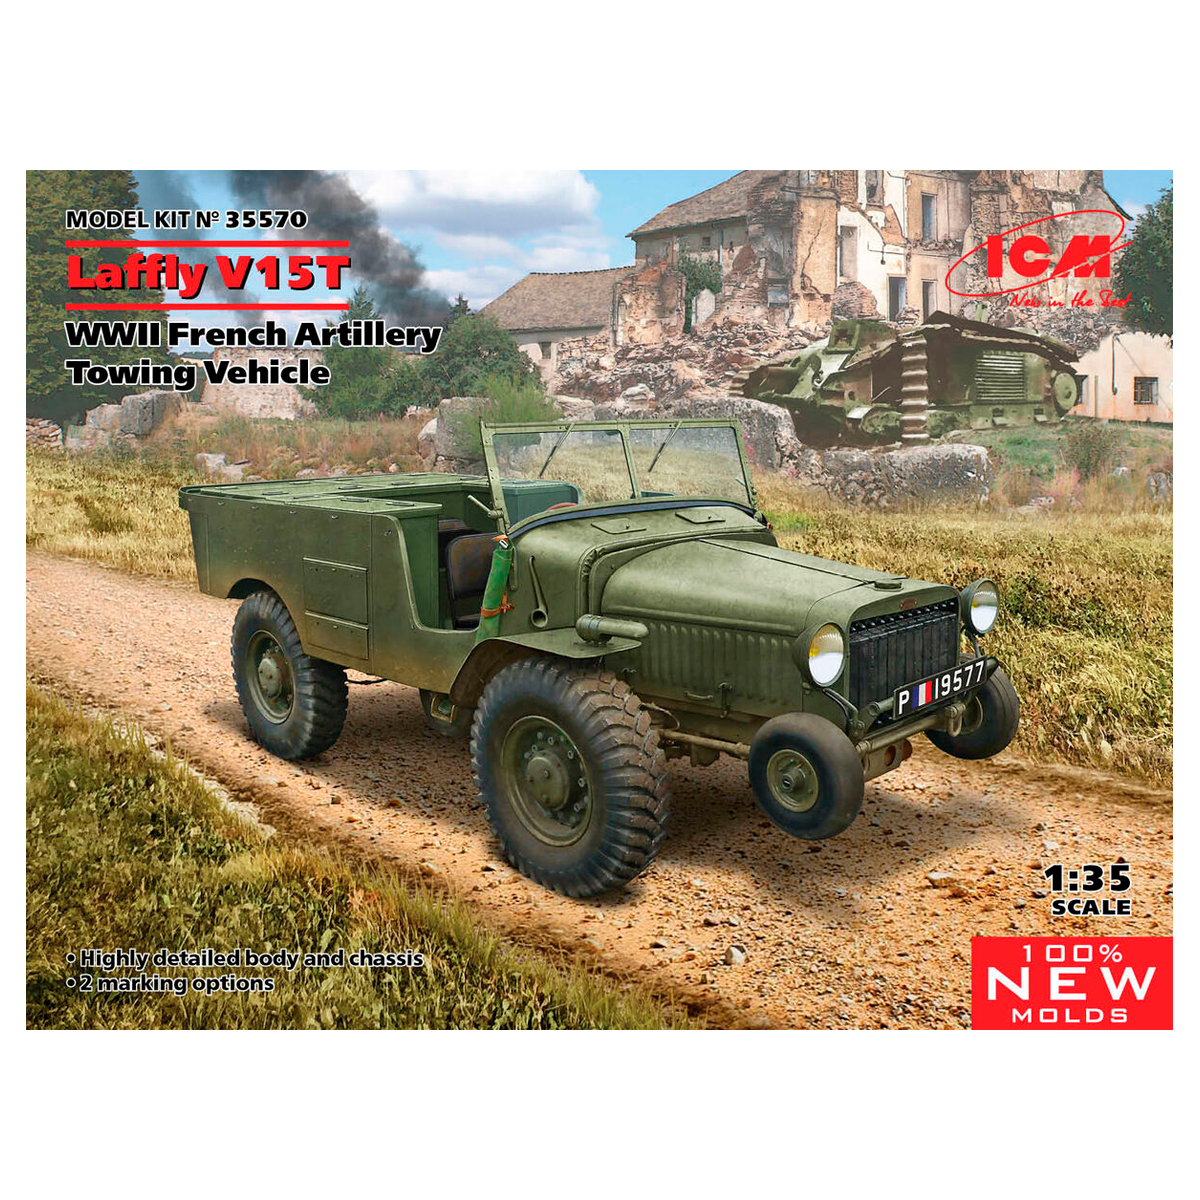 Laffly V15T, WWII French Artillery Towing Vehicle (100% new molds) 1/35